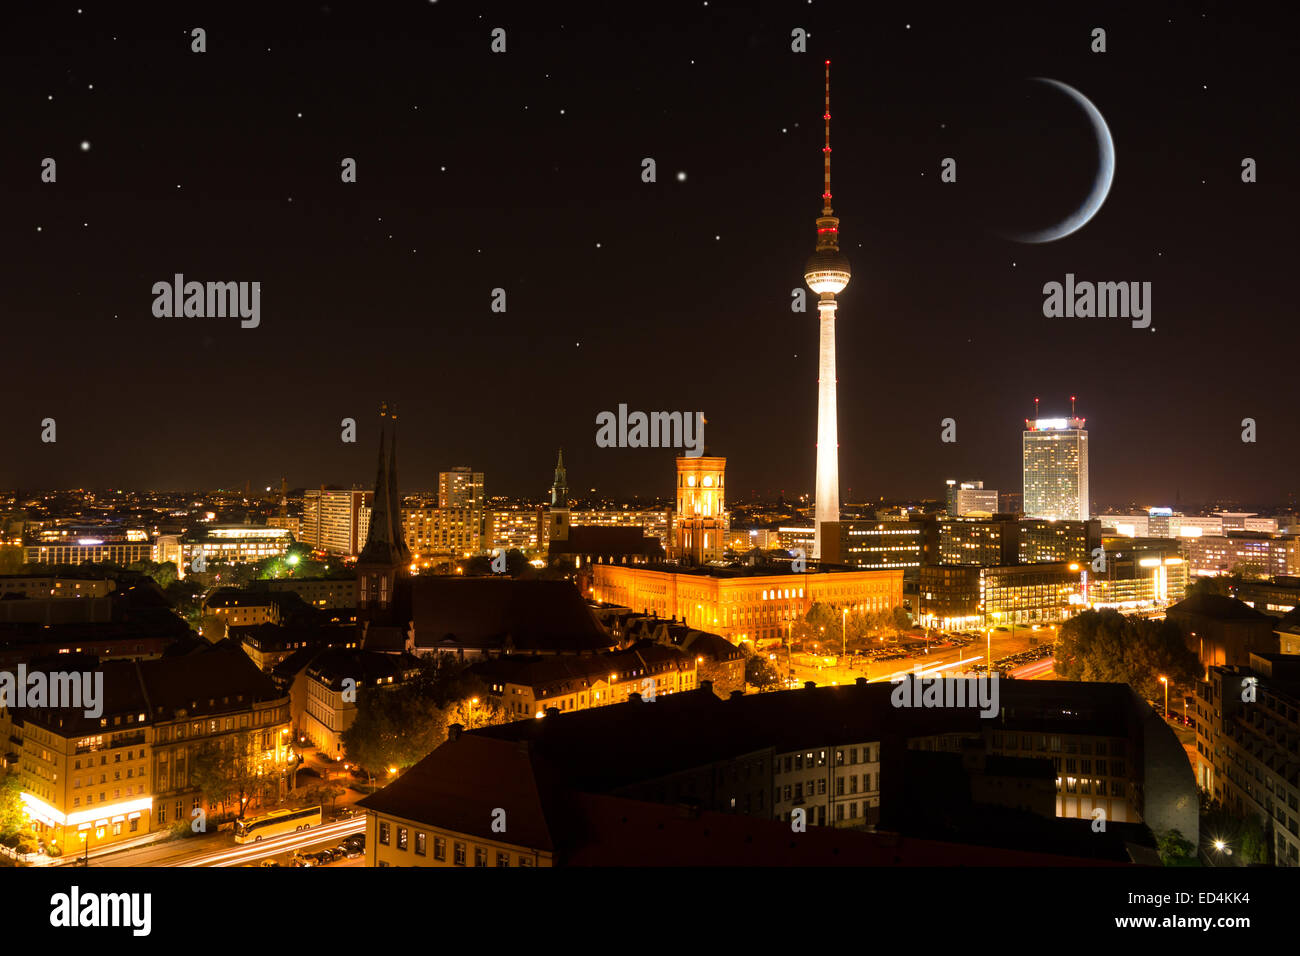 berlin skyline with moon and stars by night Stock Photo